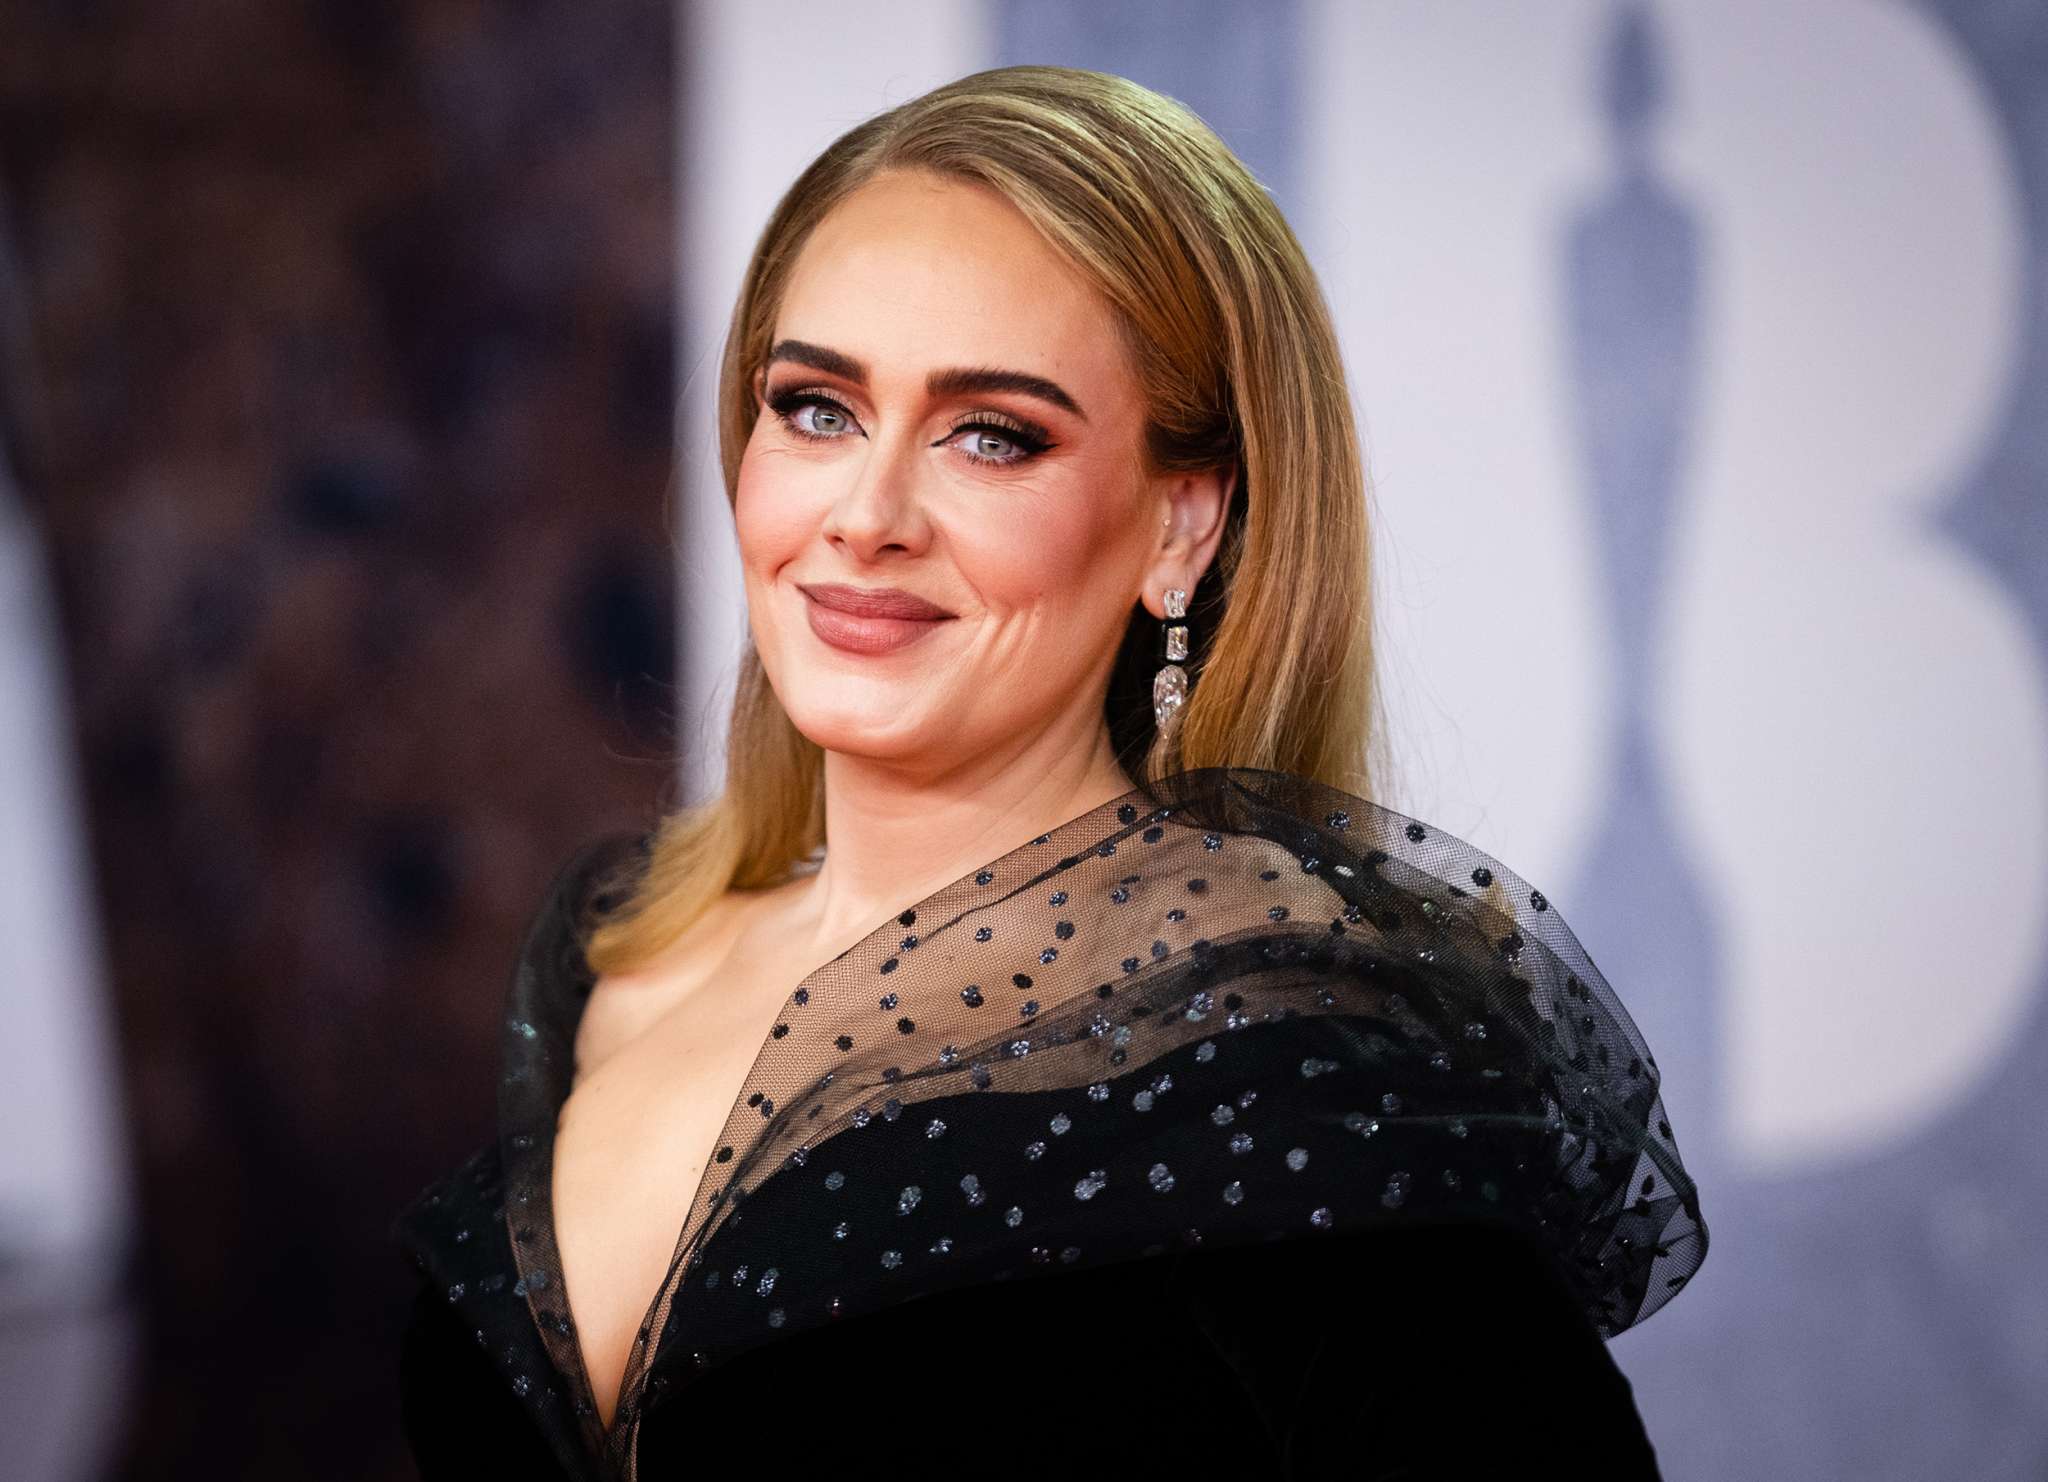 Adele Is Having Another Las Vegas Tour And She's Excited To Announce The Rescheduled Dates